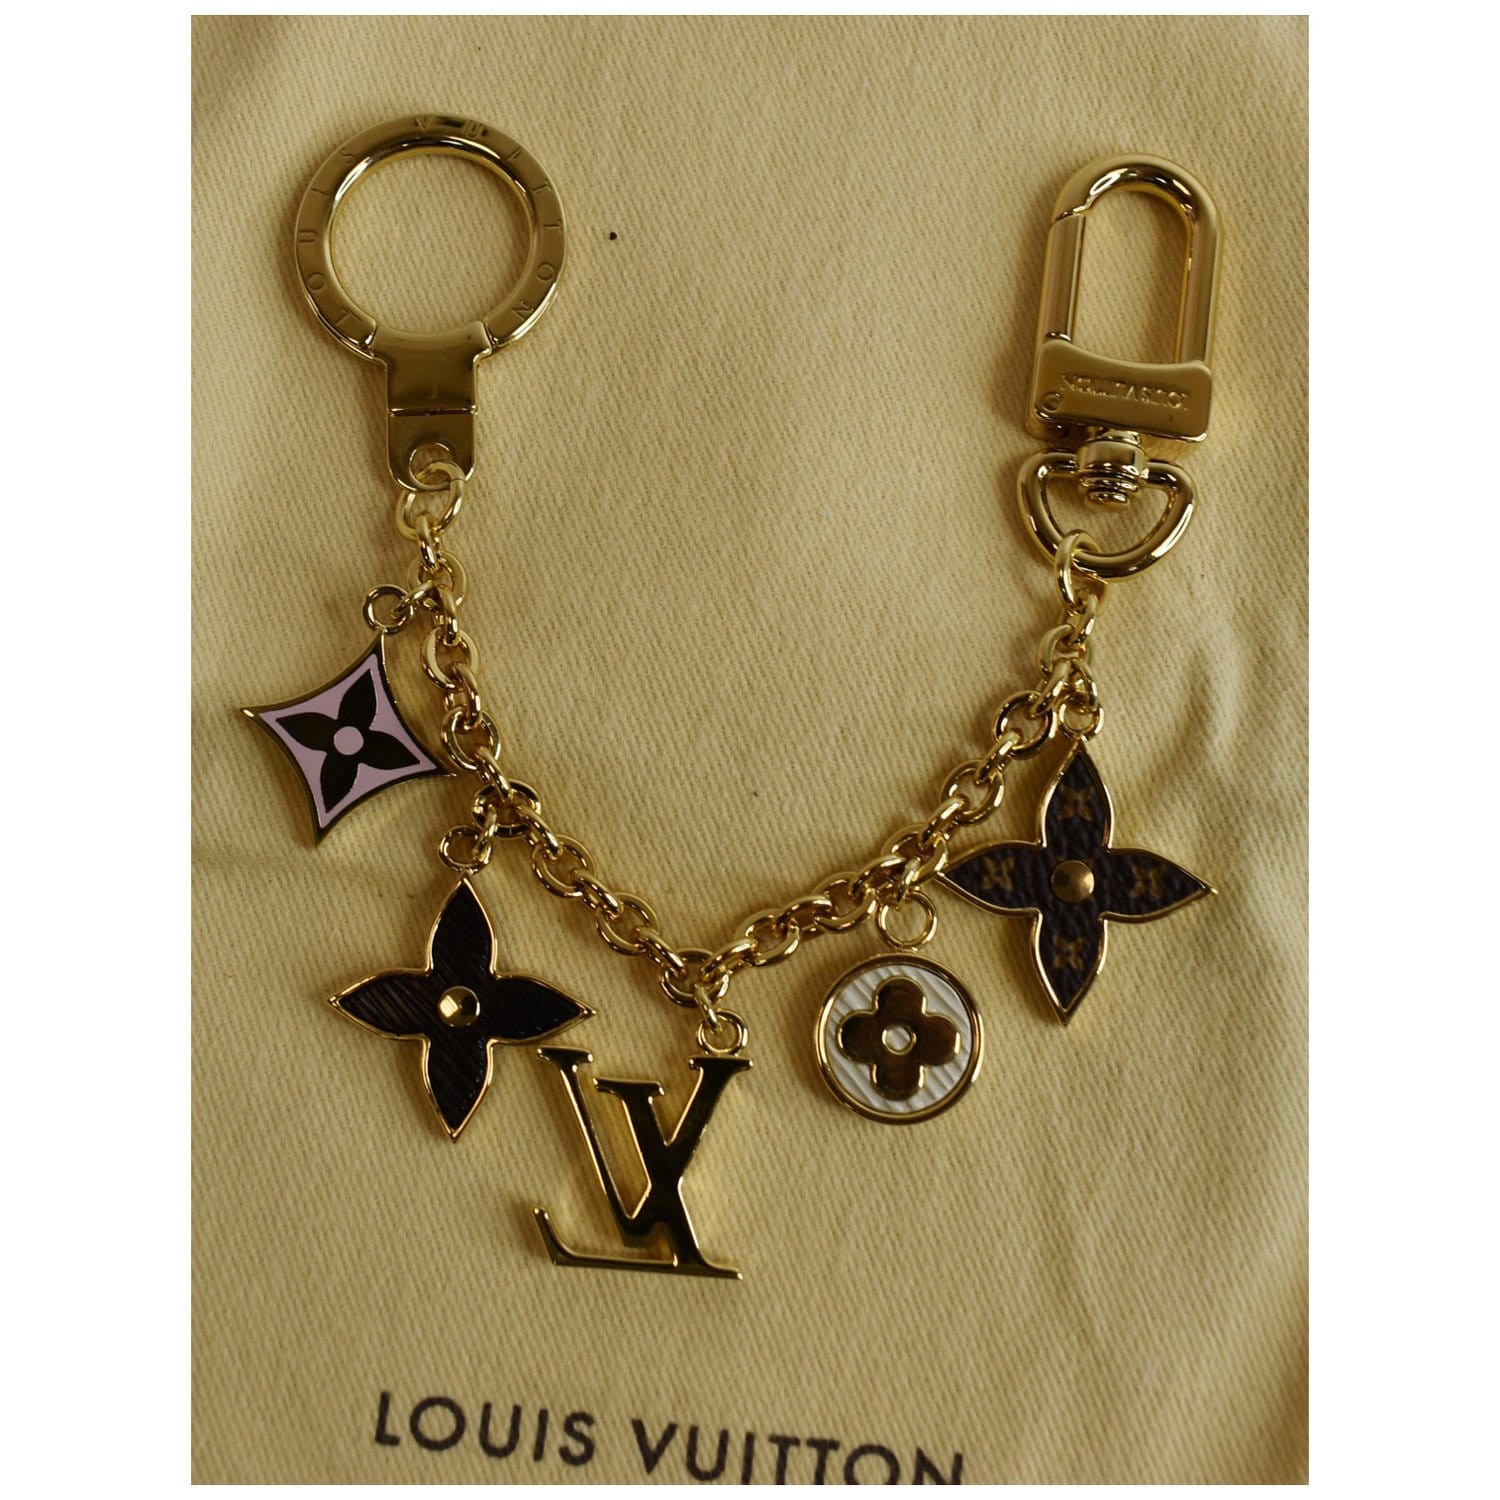 Louis Vuitton Date Code Factory chart for bagcharms, key holders, jewelry  and shoes